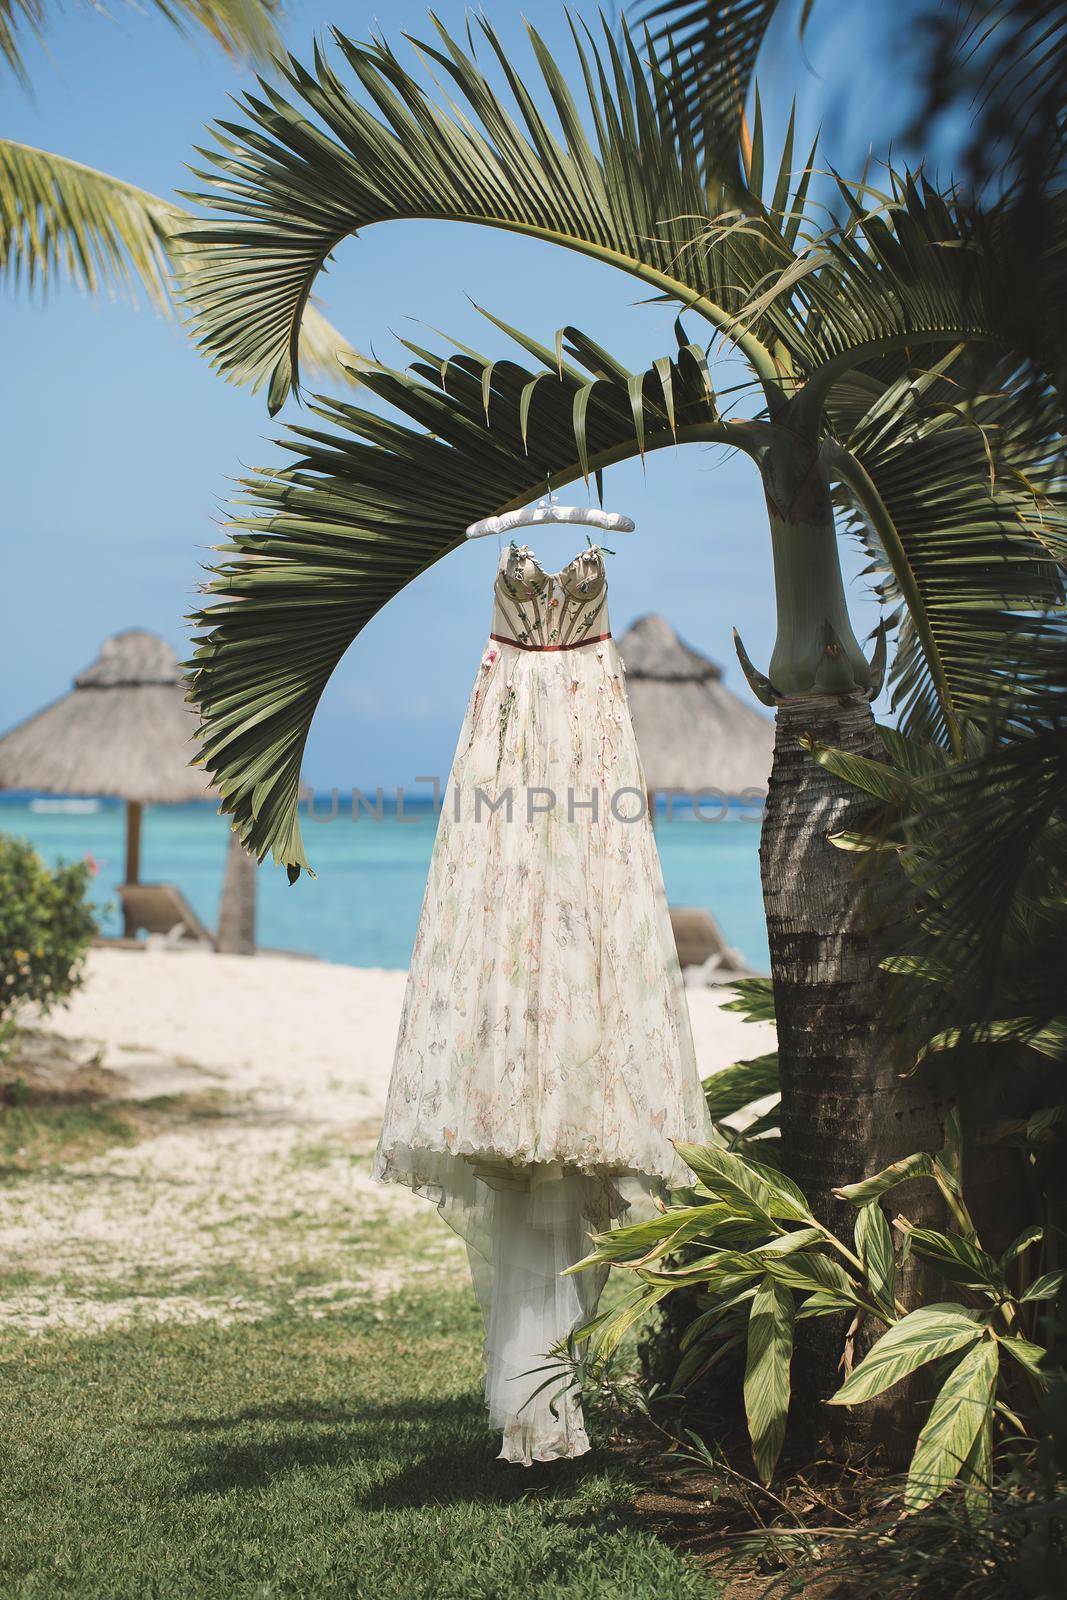 The wedding dress is hanging on a palm tree against the background of the ocean.